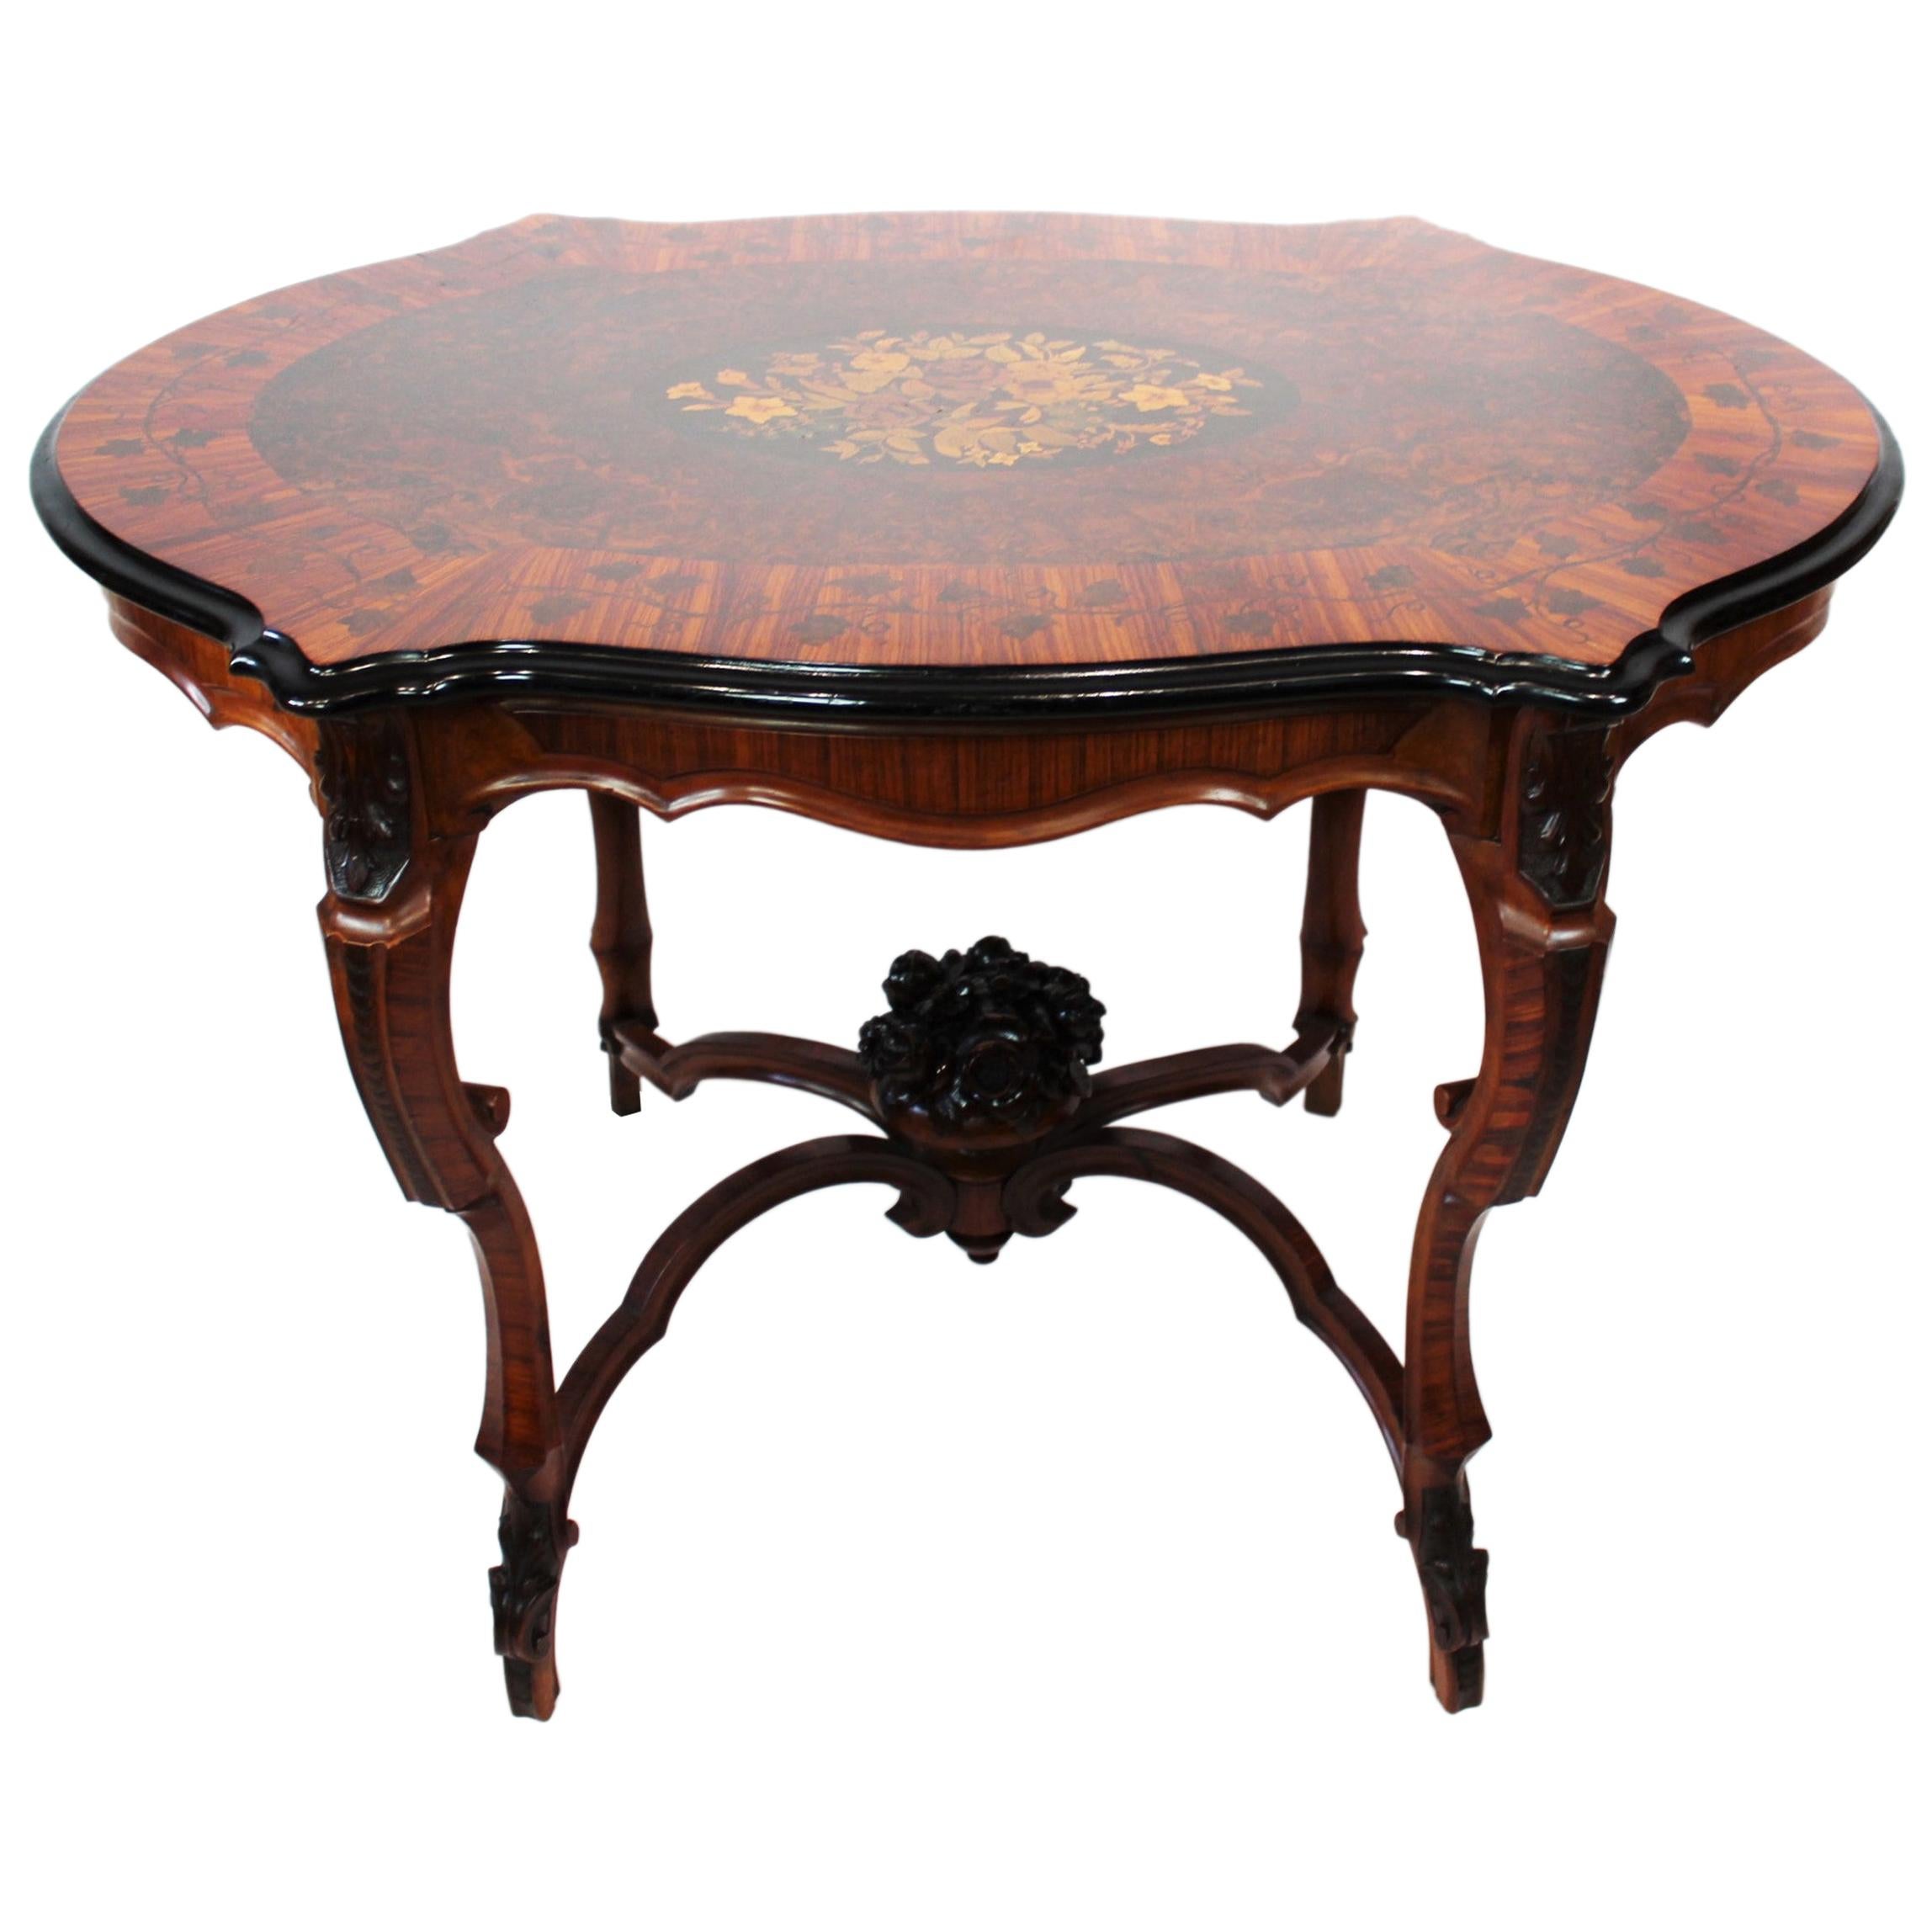 New Rococo Pedestal Table of Walnut with Carvings and Inlaid Intarsia, 1880s